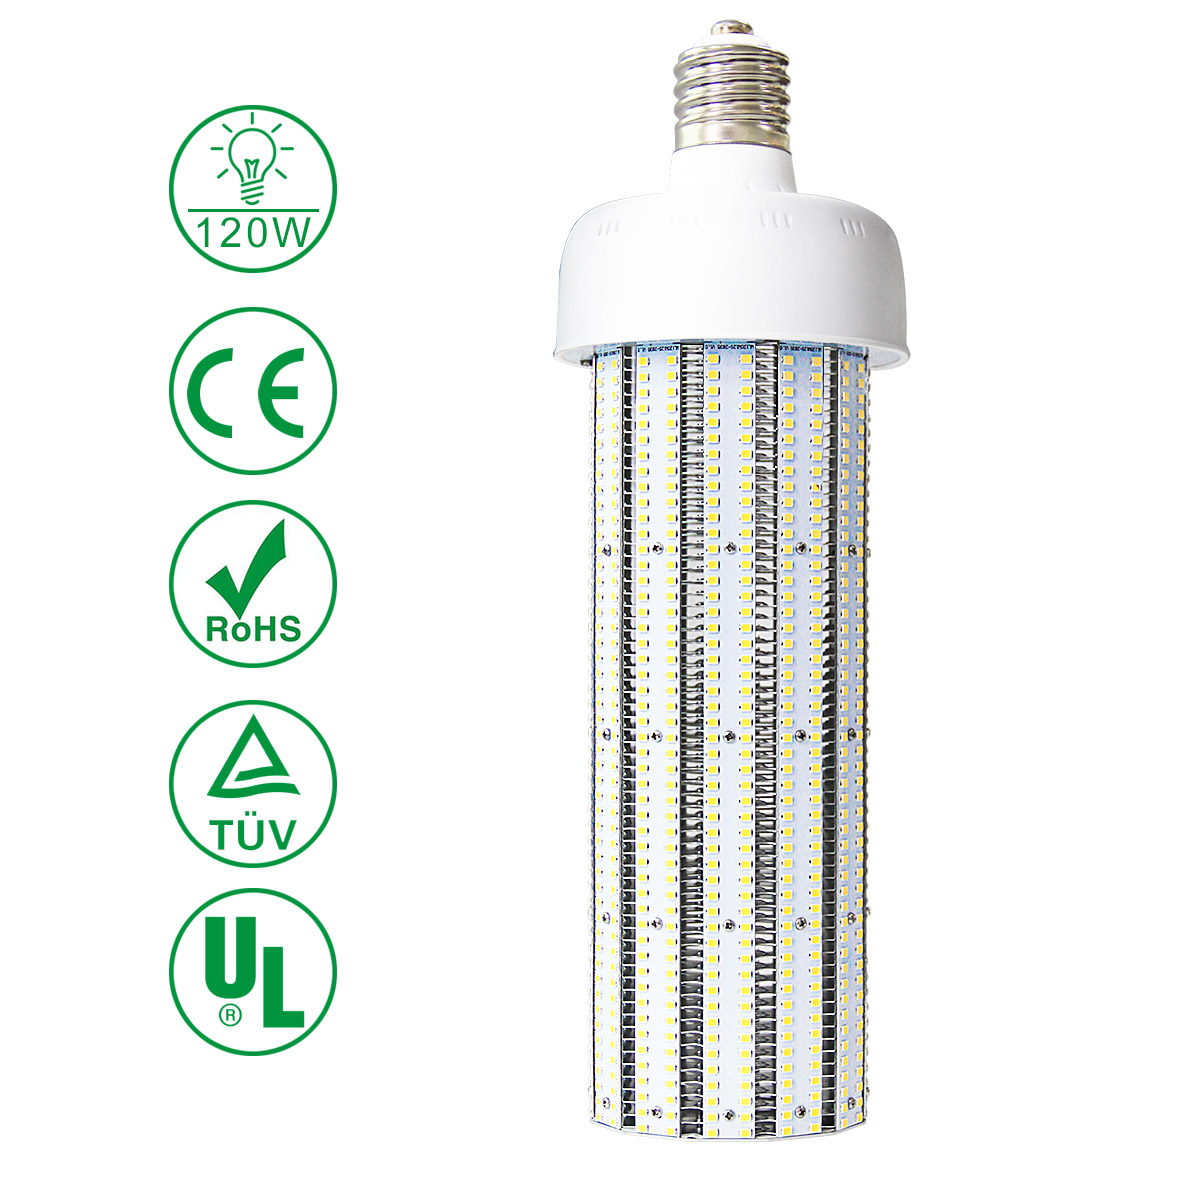 KAWELL 120W LED Corn Light Bulb, E39 Large Mogul Base LED Street/Area Light, Replacement for Fixtures HID/HPS/Metal Halide or CFL, 14400 lumen 3200K (Warm White) UL Listed TUV-Qualified DLC Certified 